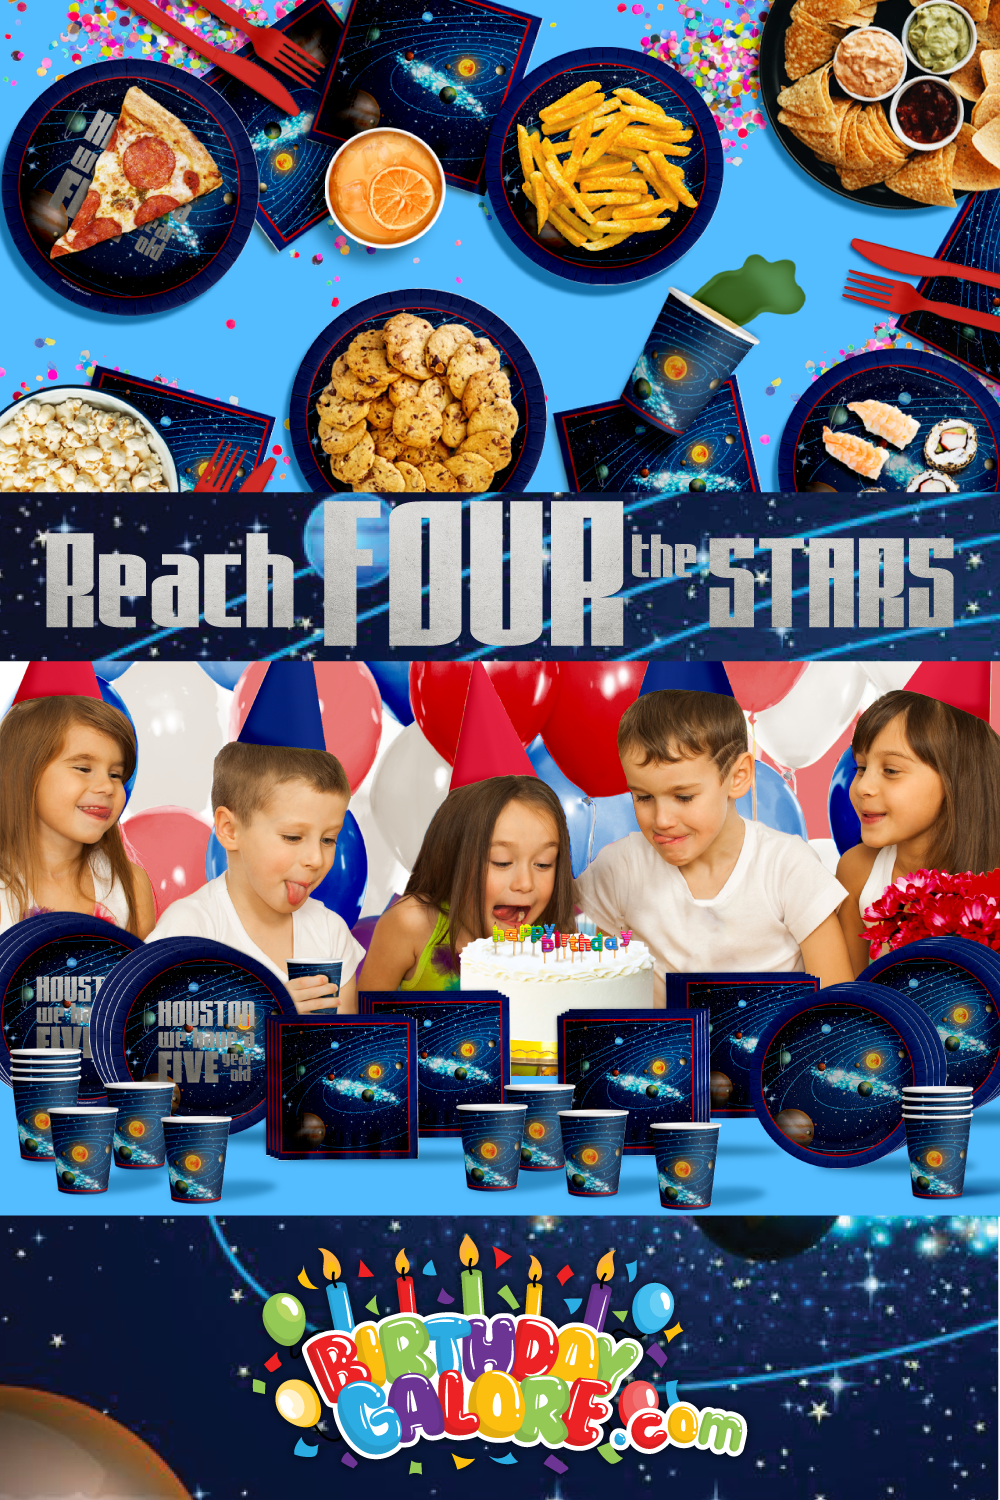 Reach Four the Stars Space 4th Birthday Party Tableware Kit For 16 Guests 64 Piece